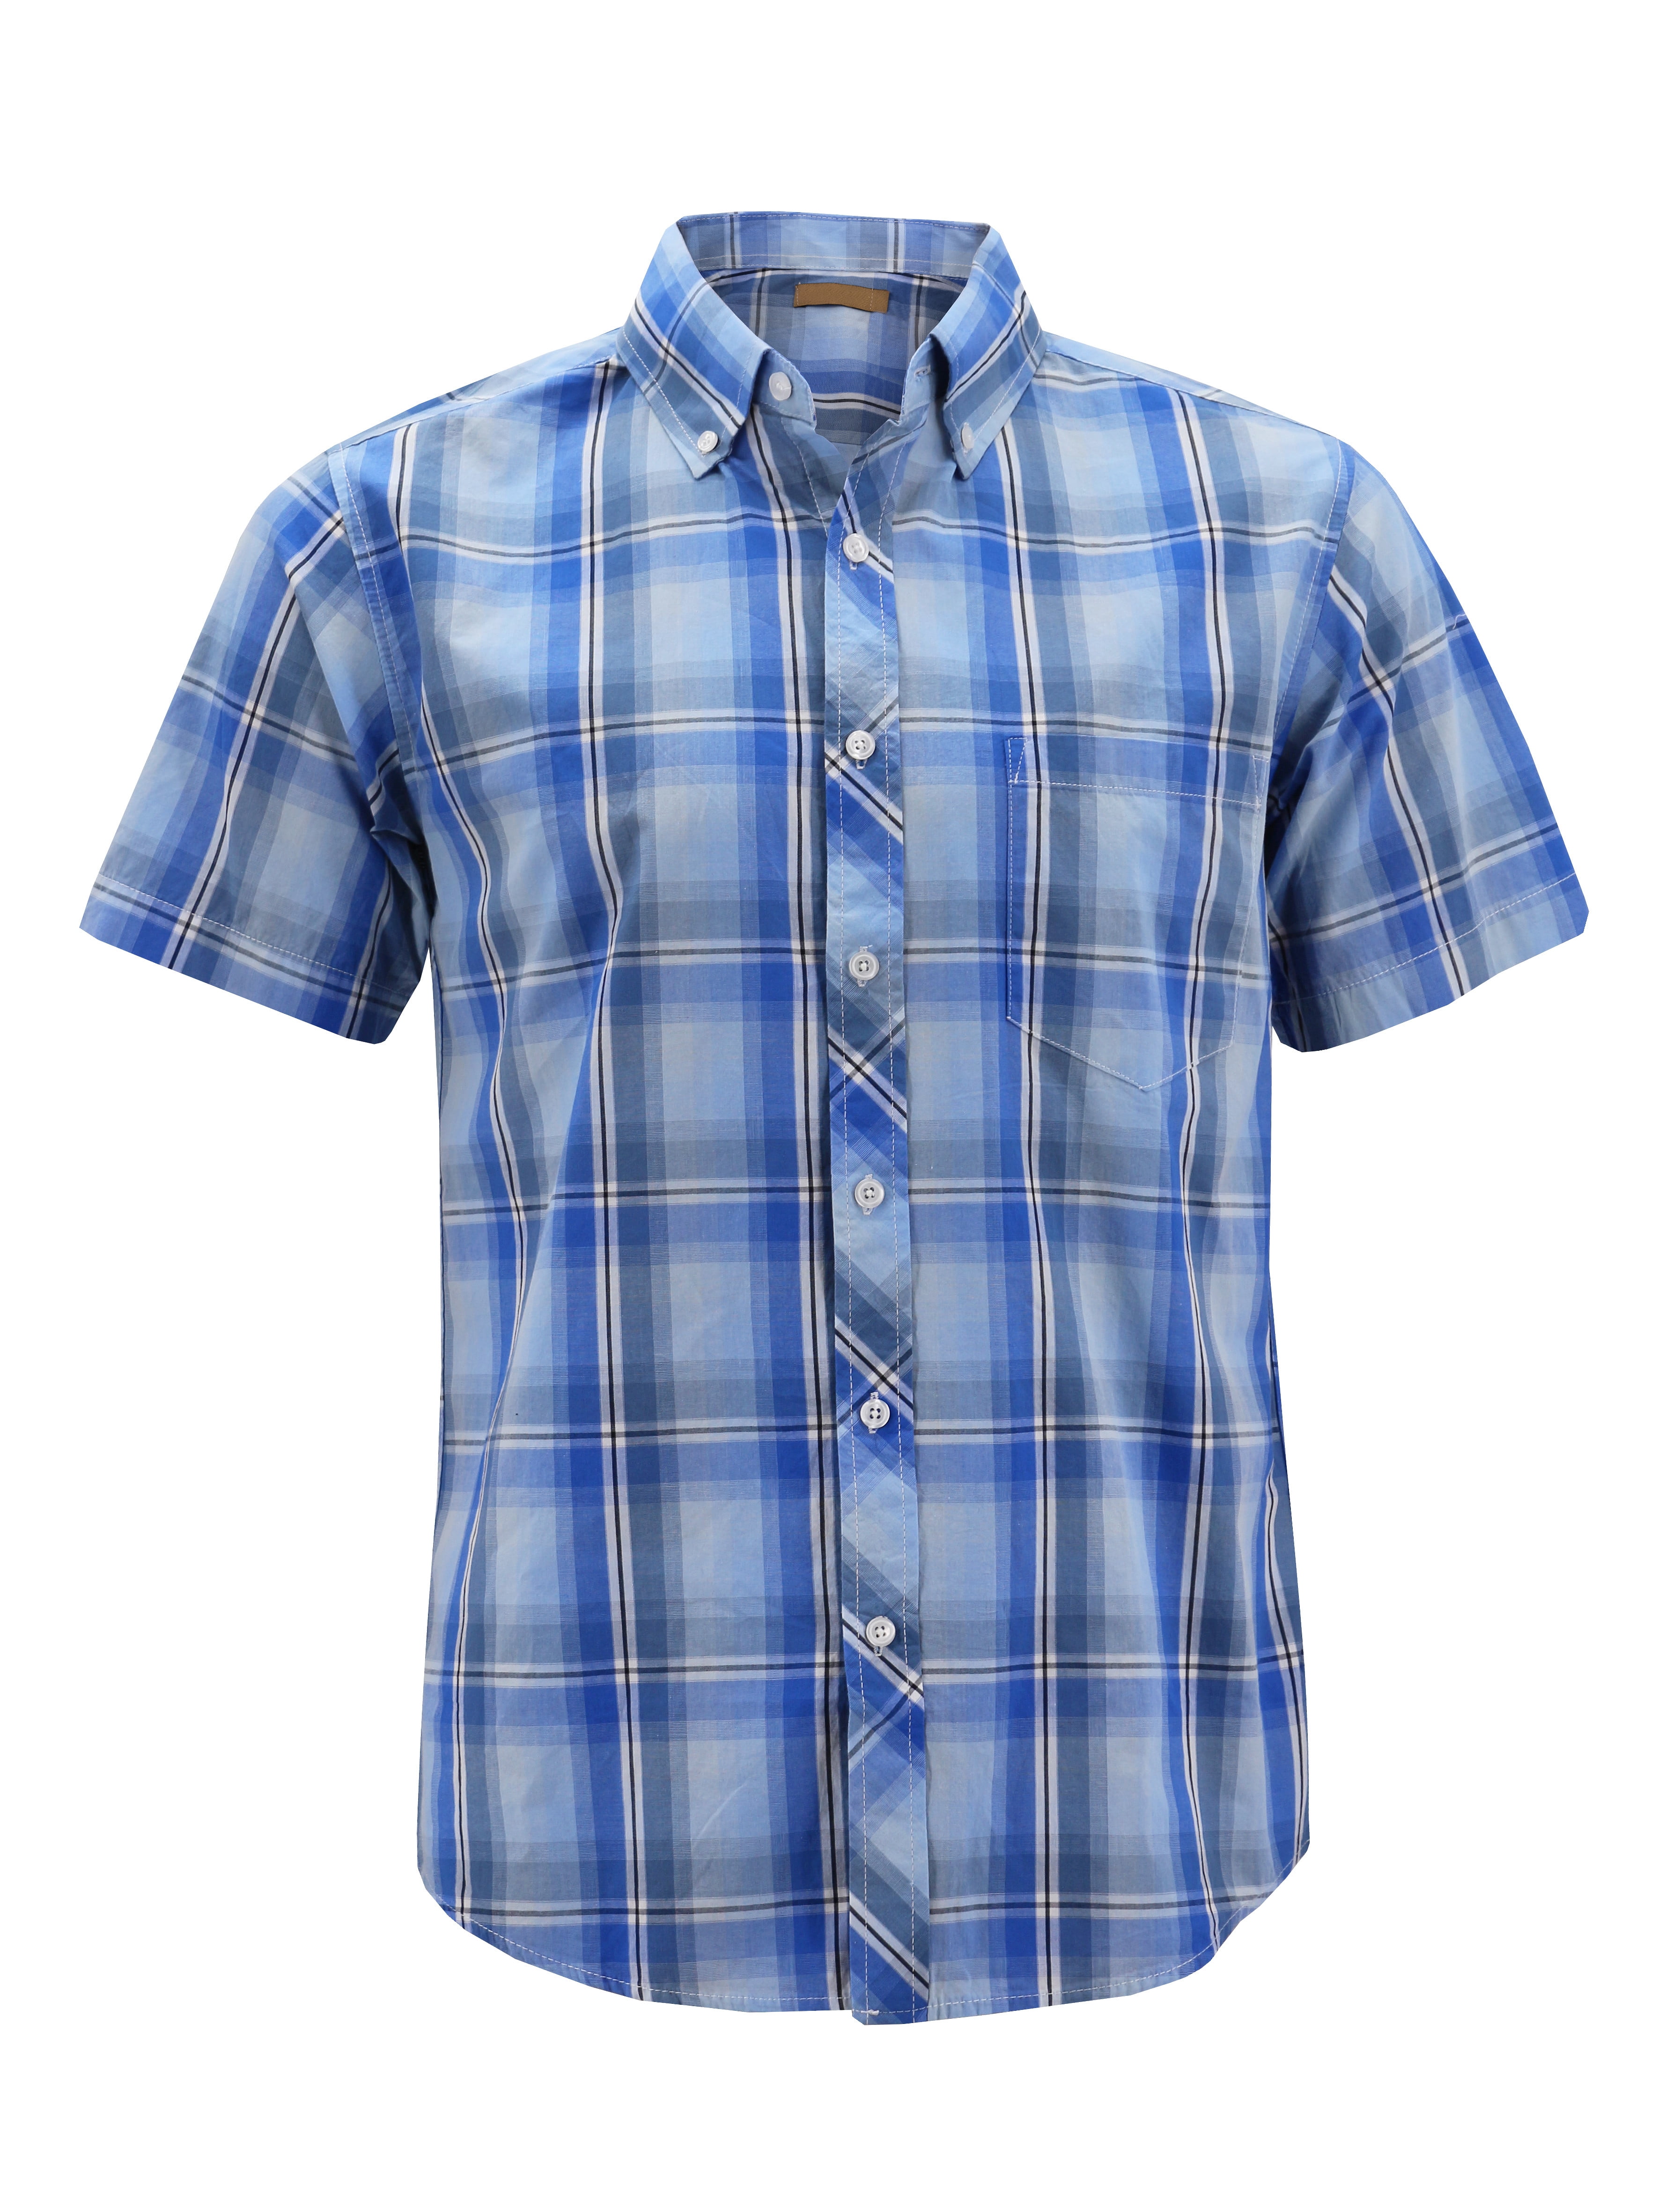 VKWEAR - Men’s Cotton Casual Short Sleeve Classic Collared Plaid Button